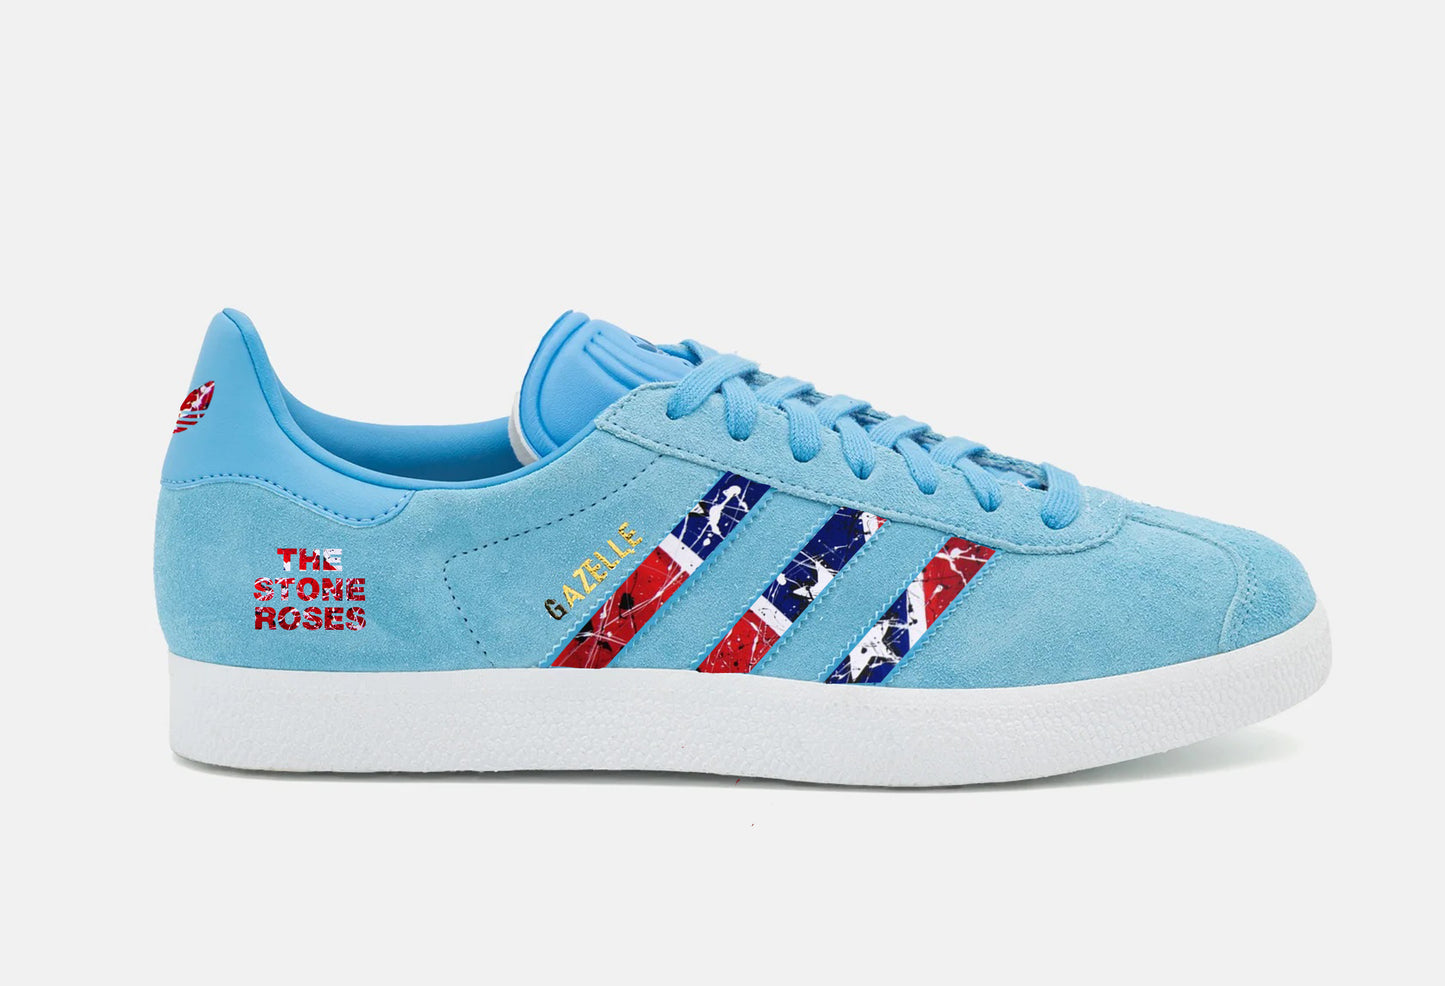 Limited edition The Stone Roses Waterfall Aqua blue Adidas custom Gazelle trainers / sneakers